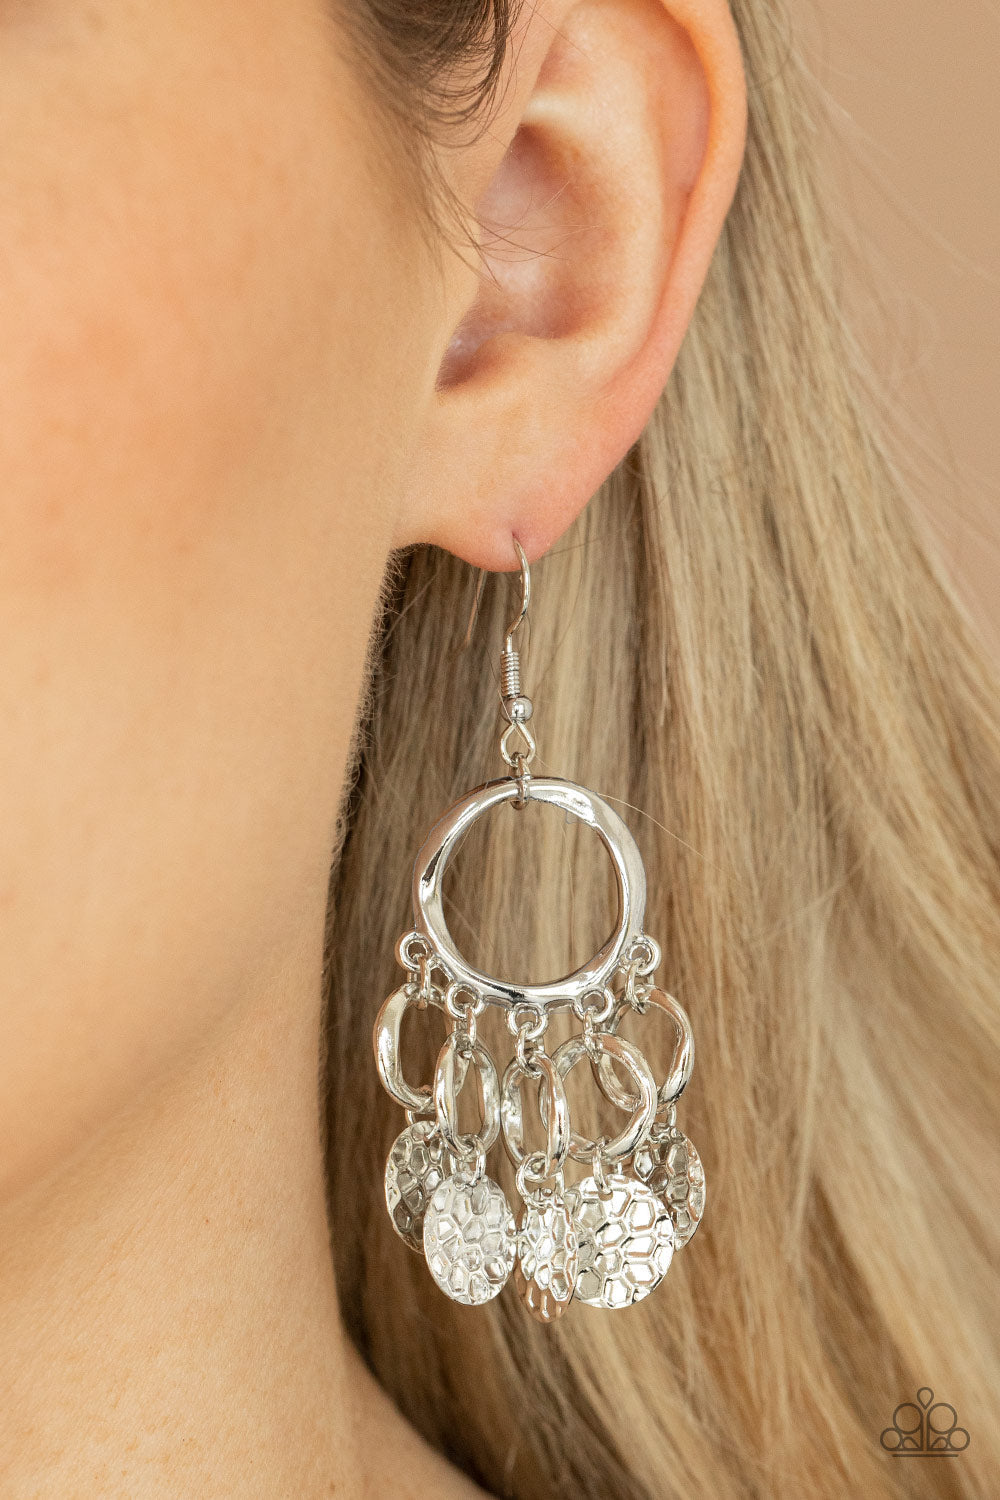 PRE-ORDER - Paparazzi Partners in CHIME - Silver - Earrings - $5 Jewelry with Ashley Swint